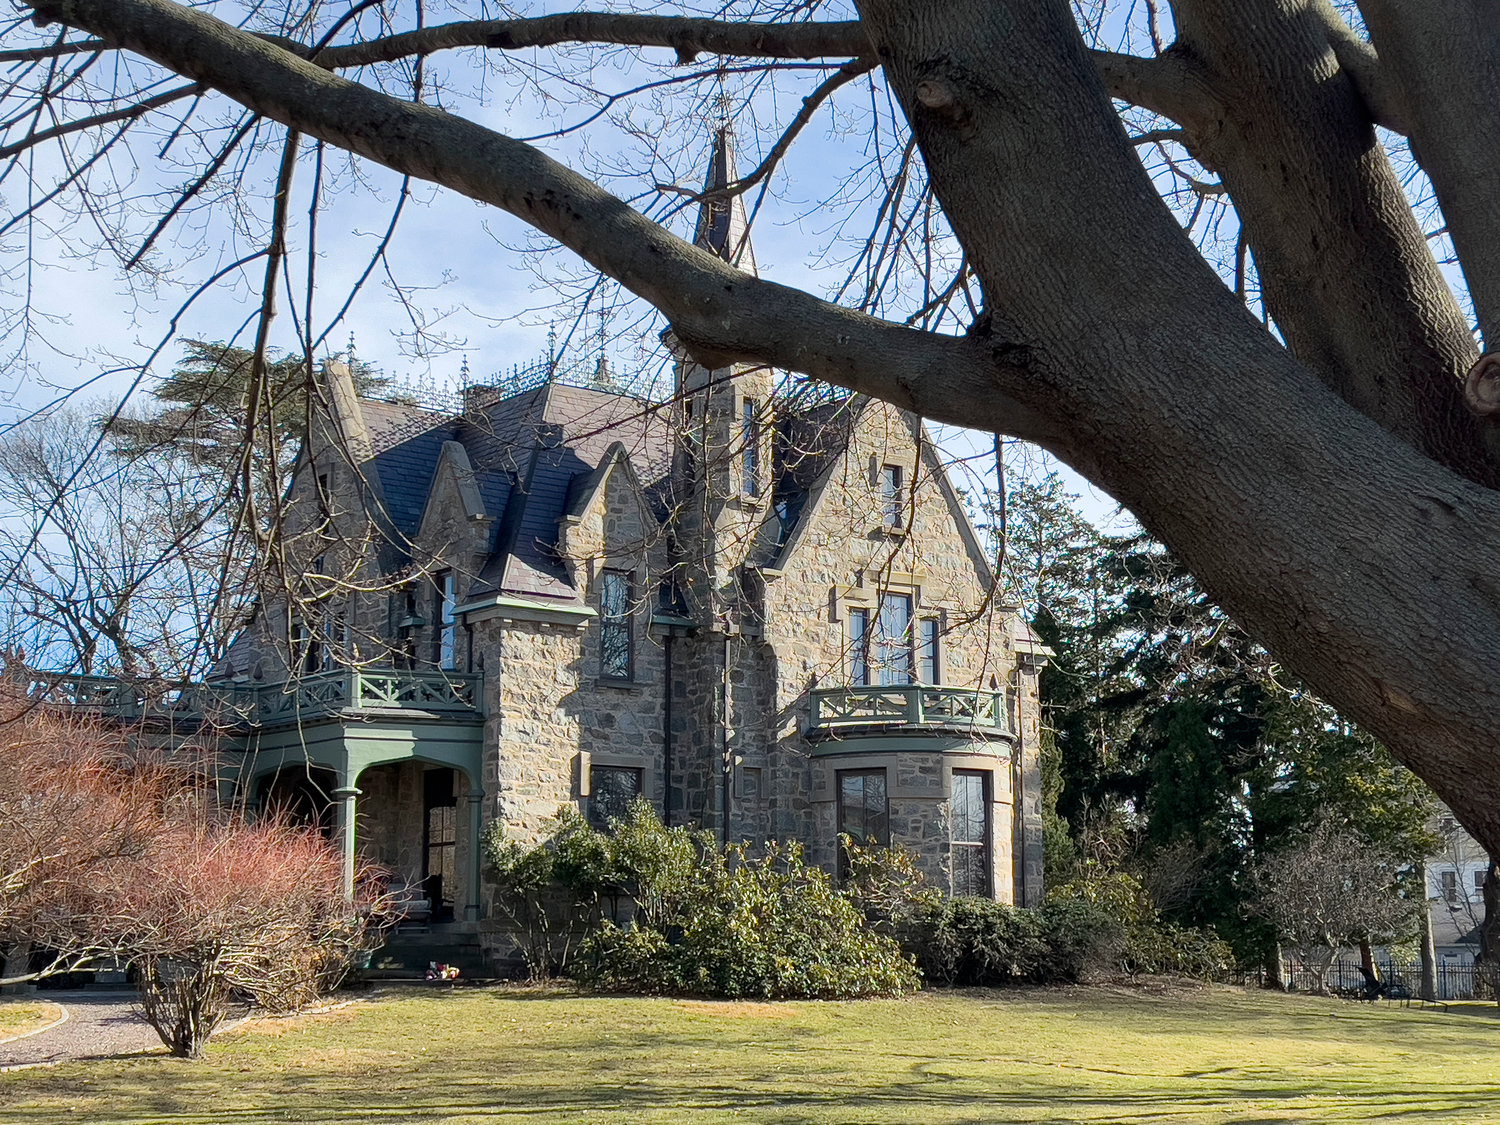 The Seven Oaks House, circa 1873, is a Gothic Revival home designed by the famous architect, James Renwick of New York, for former Rhode Island governor Augustus O. Bourn. It is a protected part of the town’s Historic District when it was created, and a development planned for a lot next-door was rejected based on that inclusion in 1987.